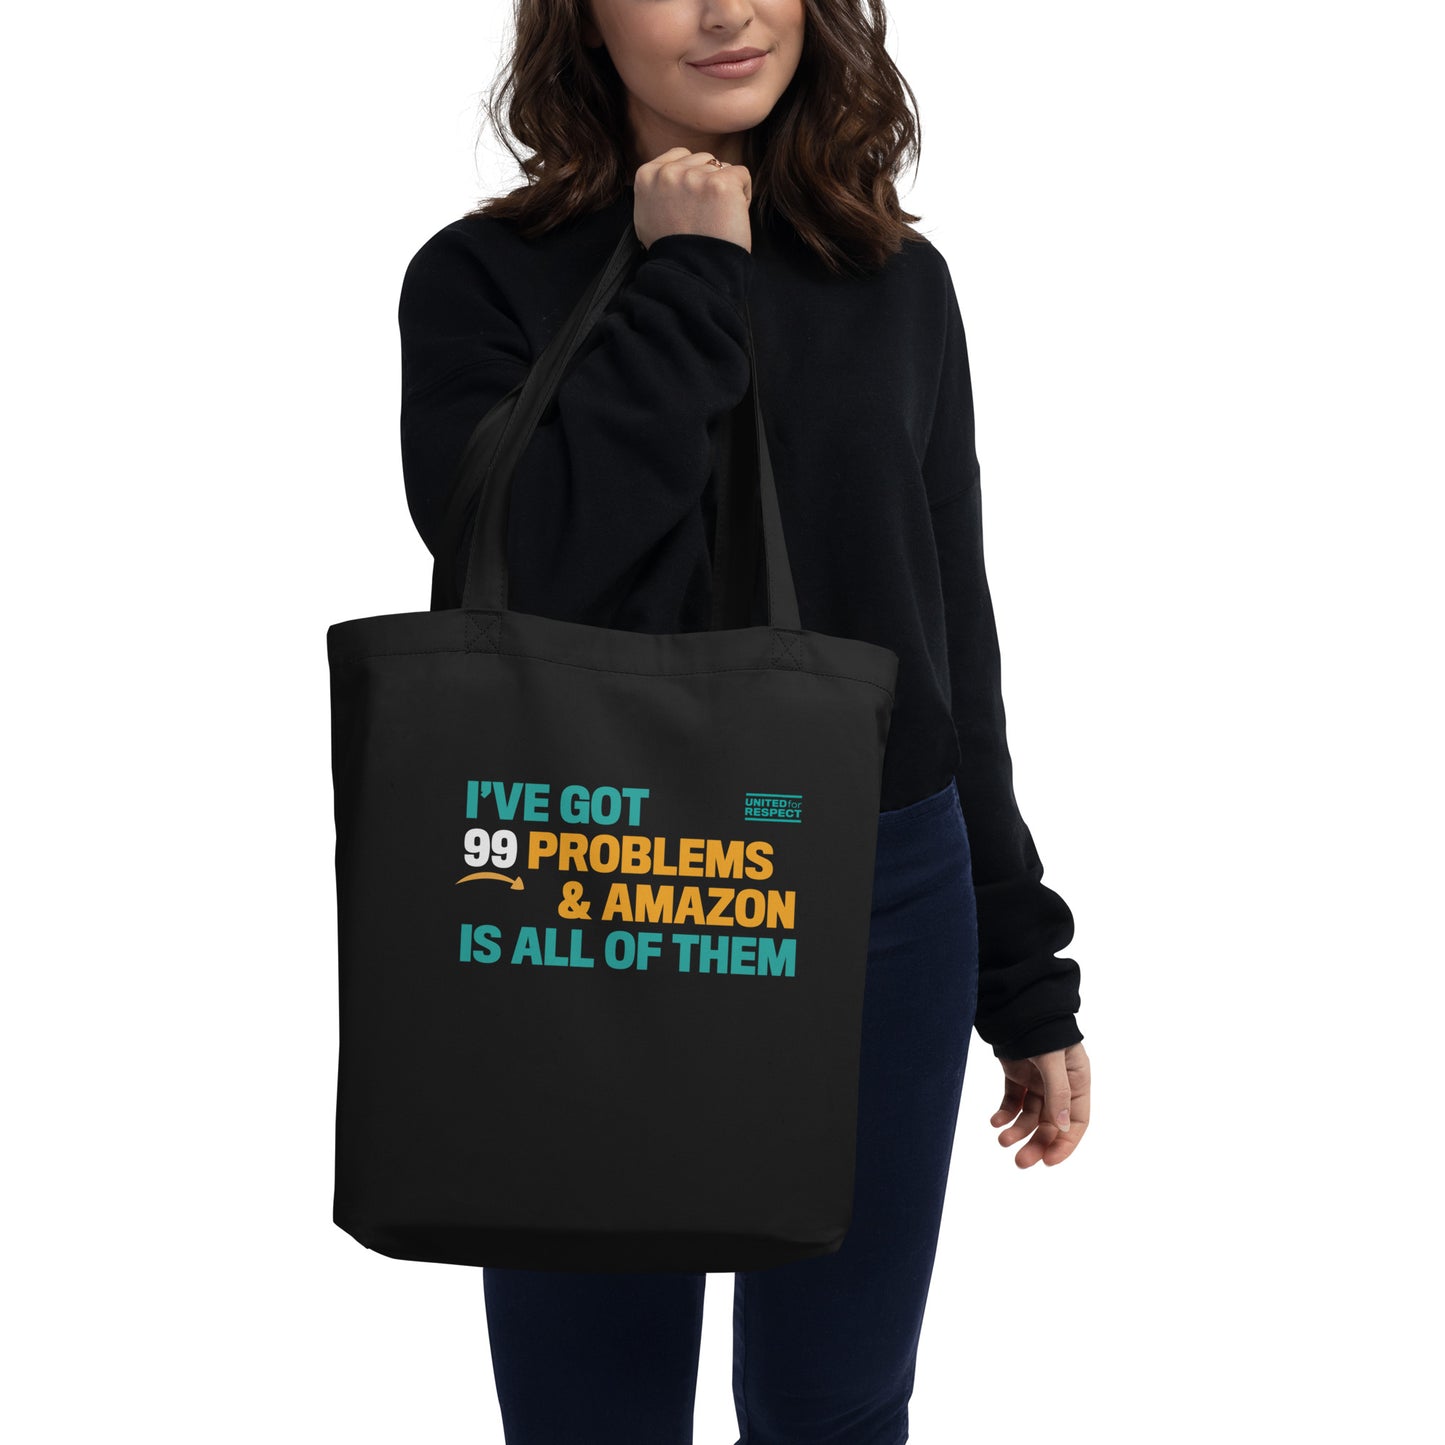 "I've got 99 problems and Amazon is all of them" super swag tote bag